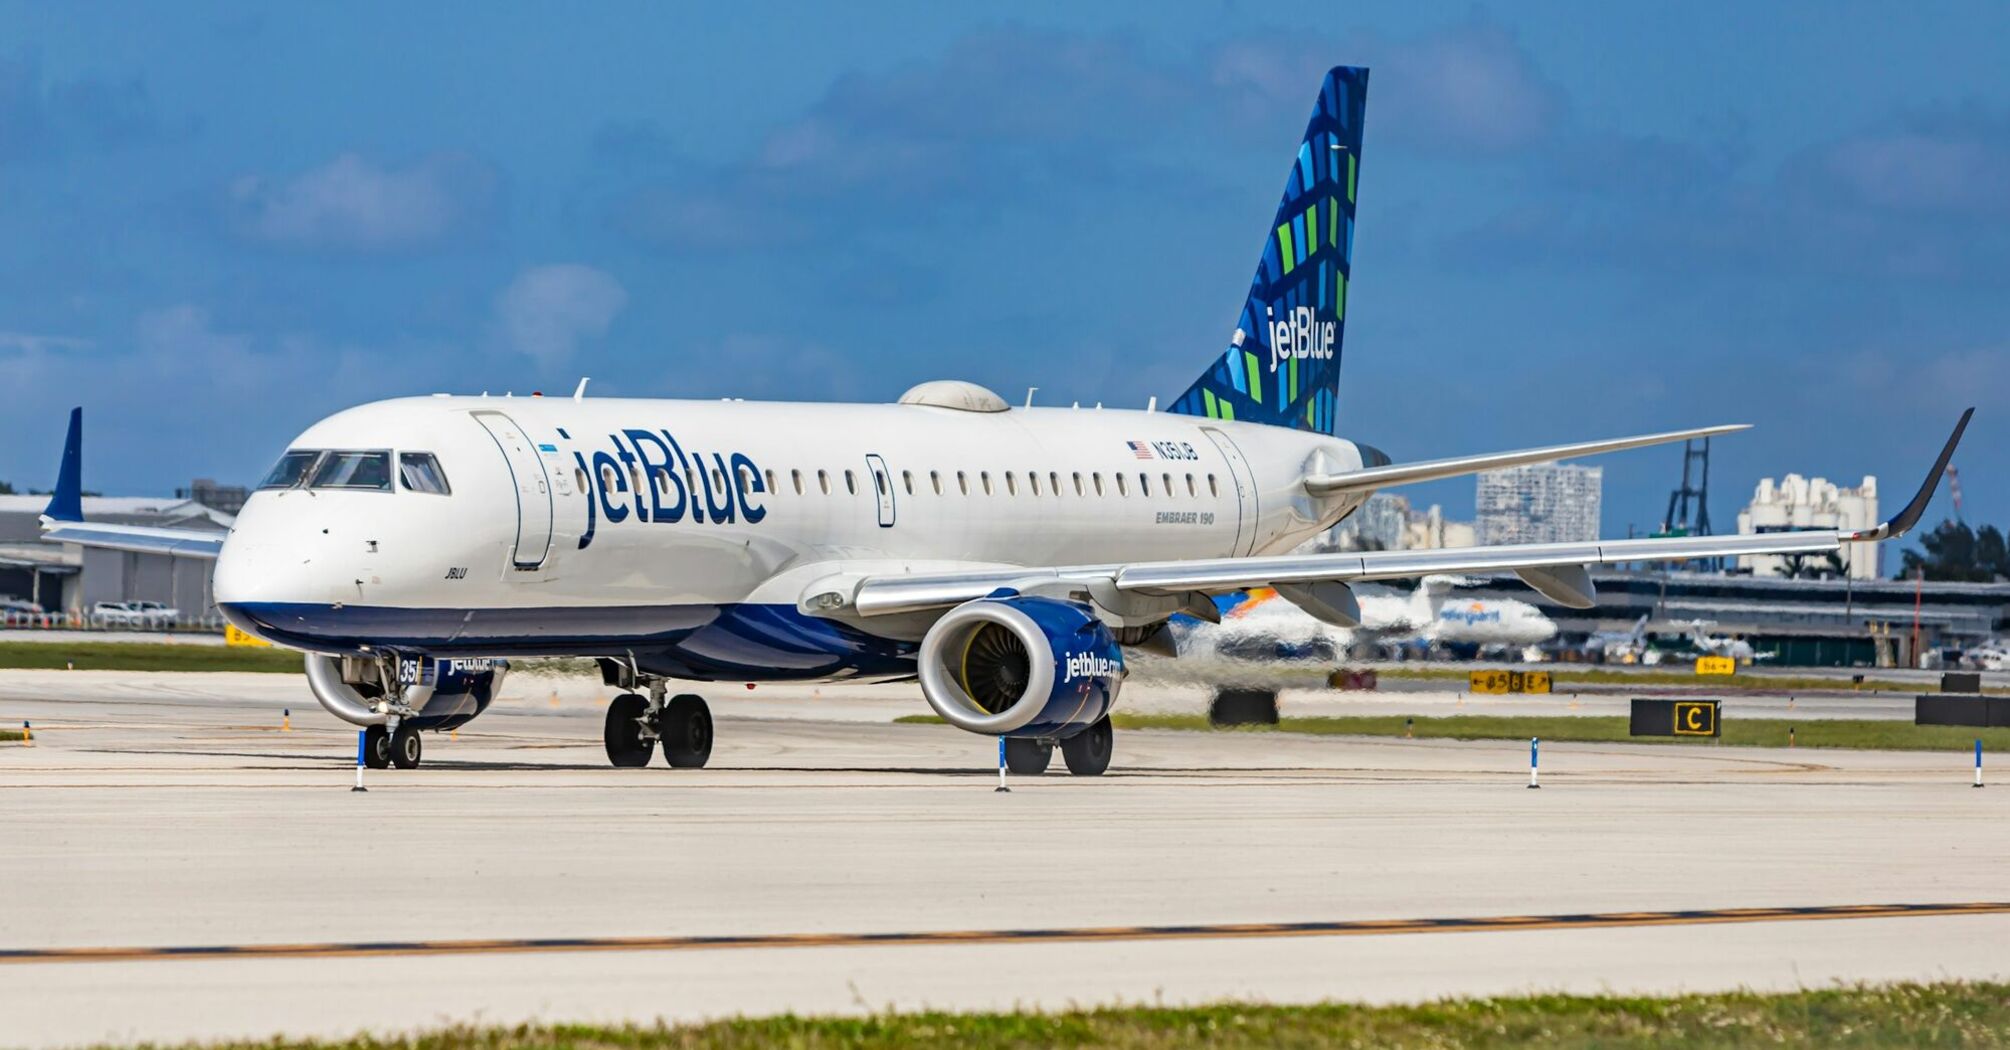 JetBlue Embraer 190 aircraft on the runway, ready for departure